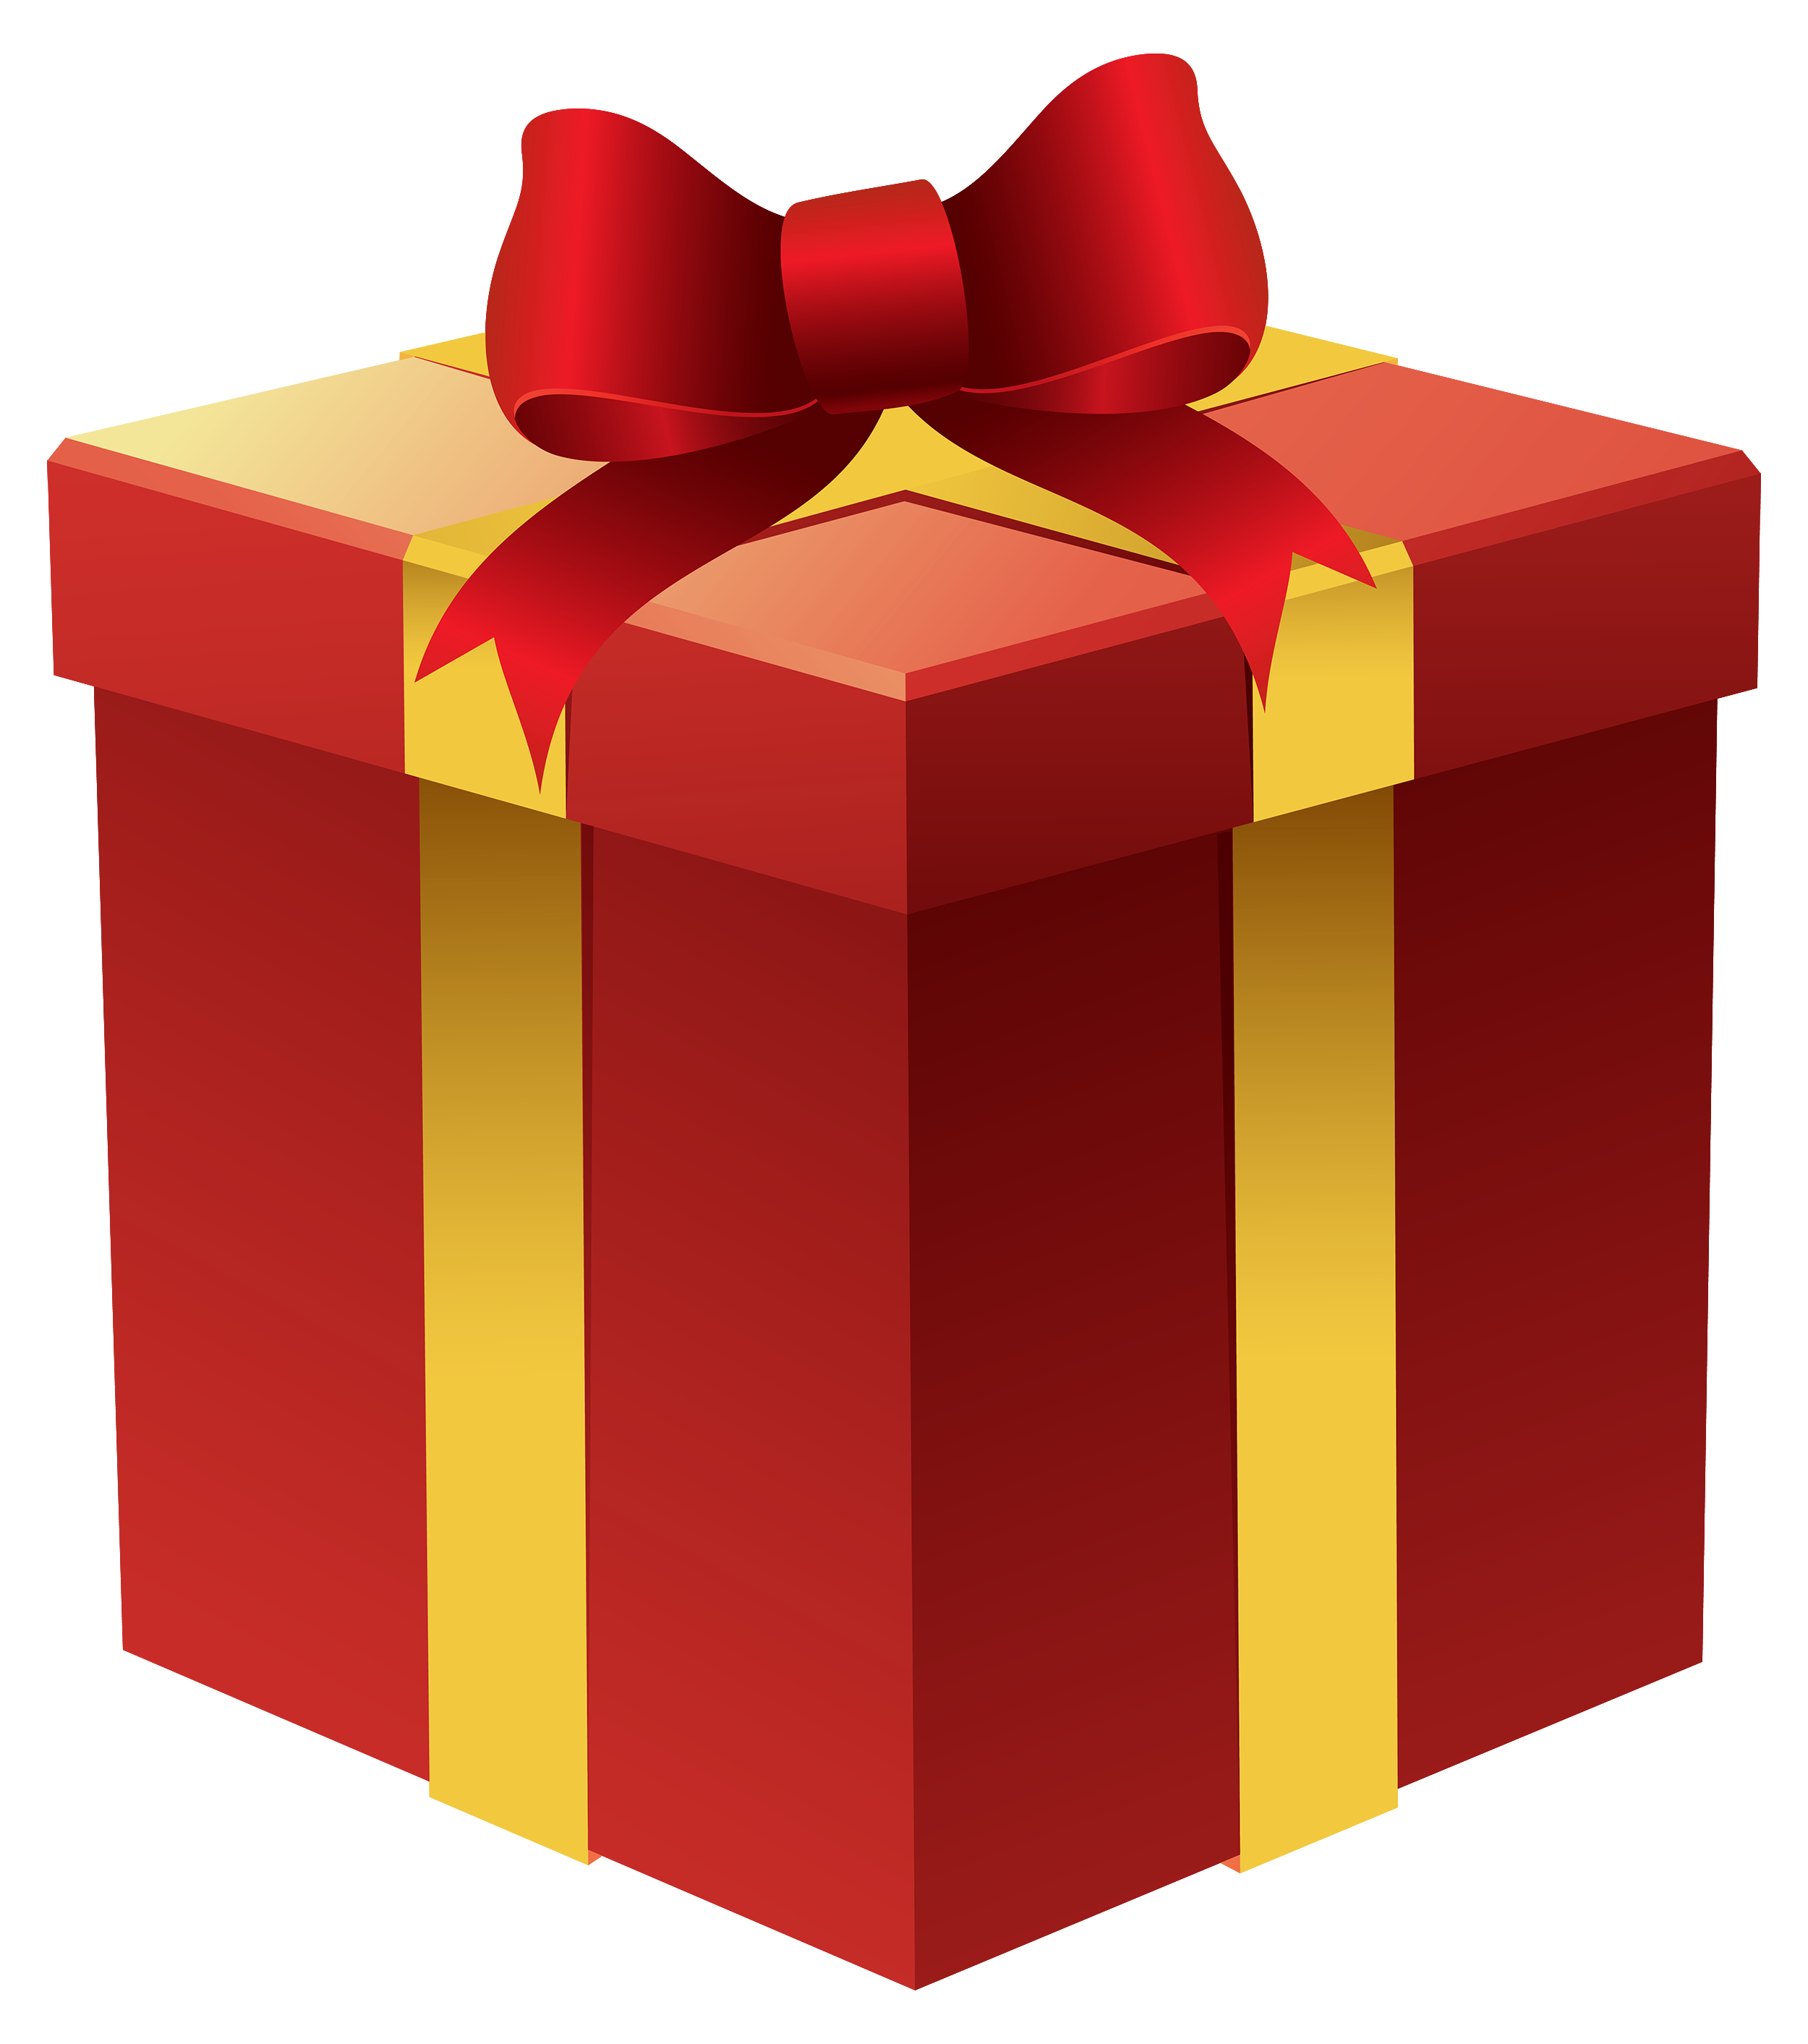 Clipart present. Gift box in red